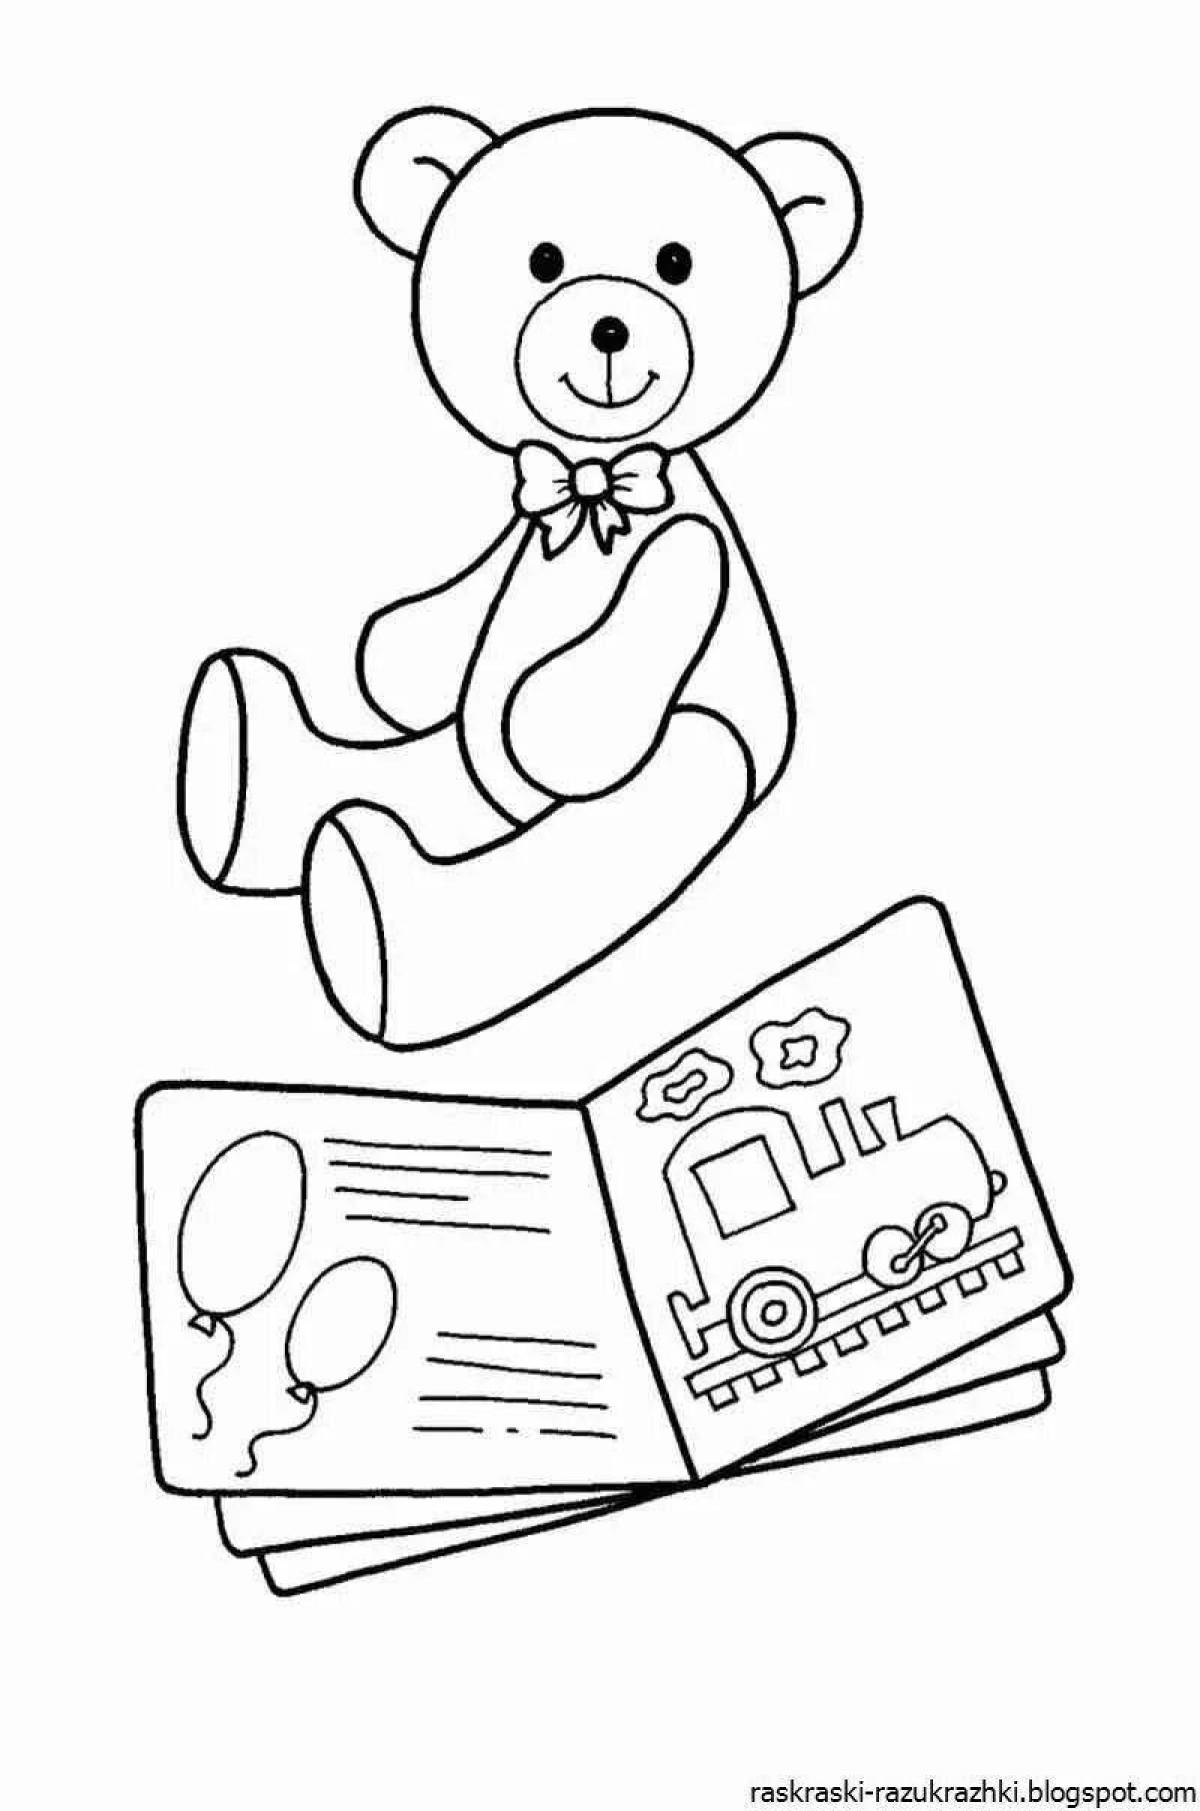 Fun coloring book for kids archive